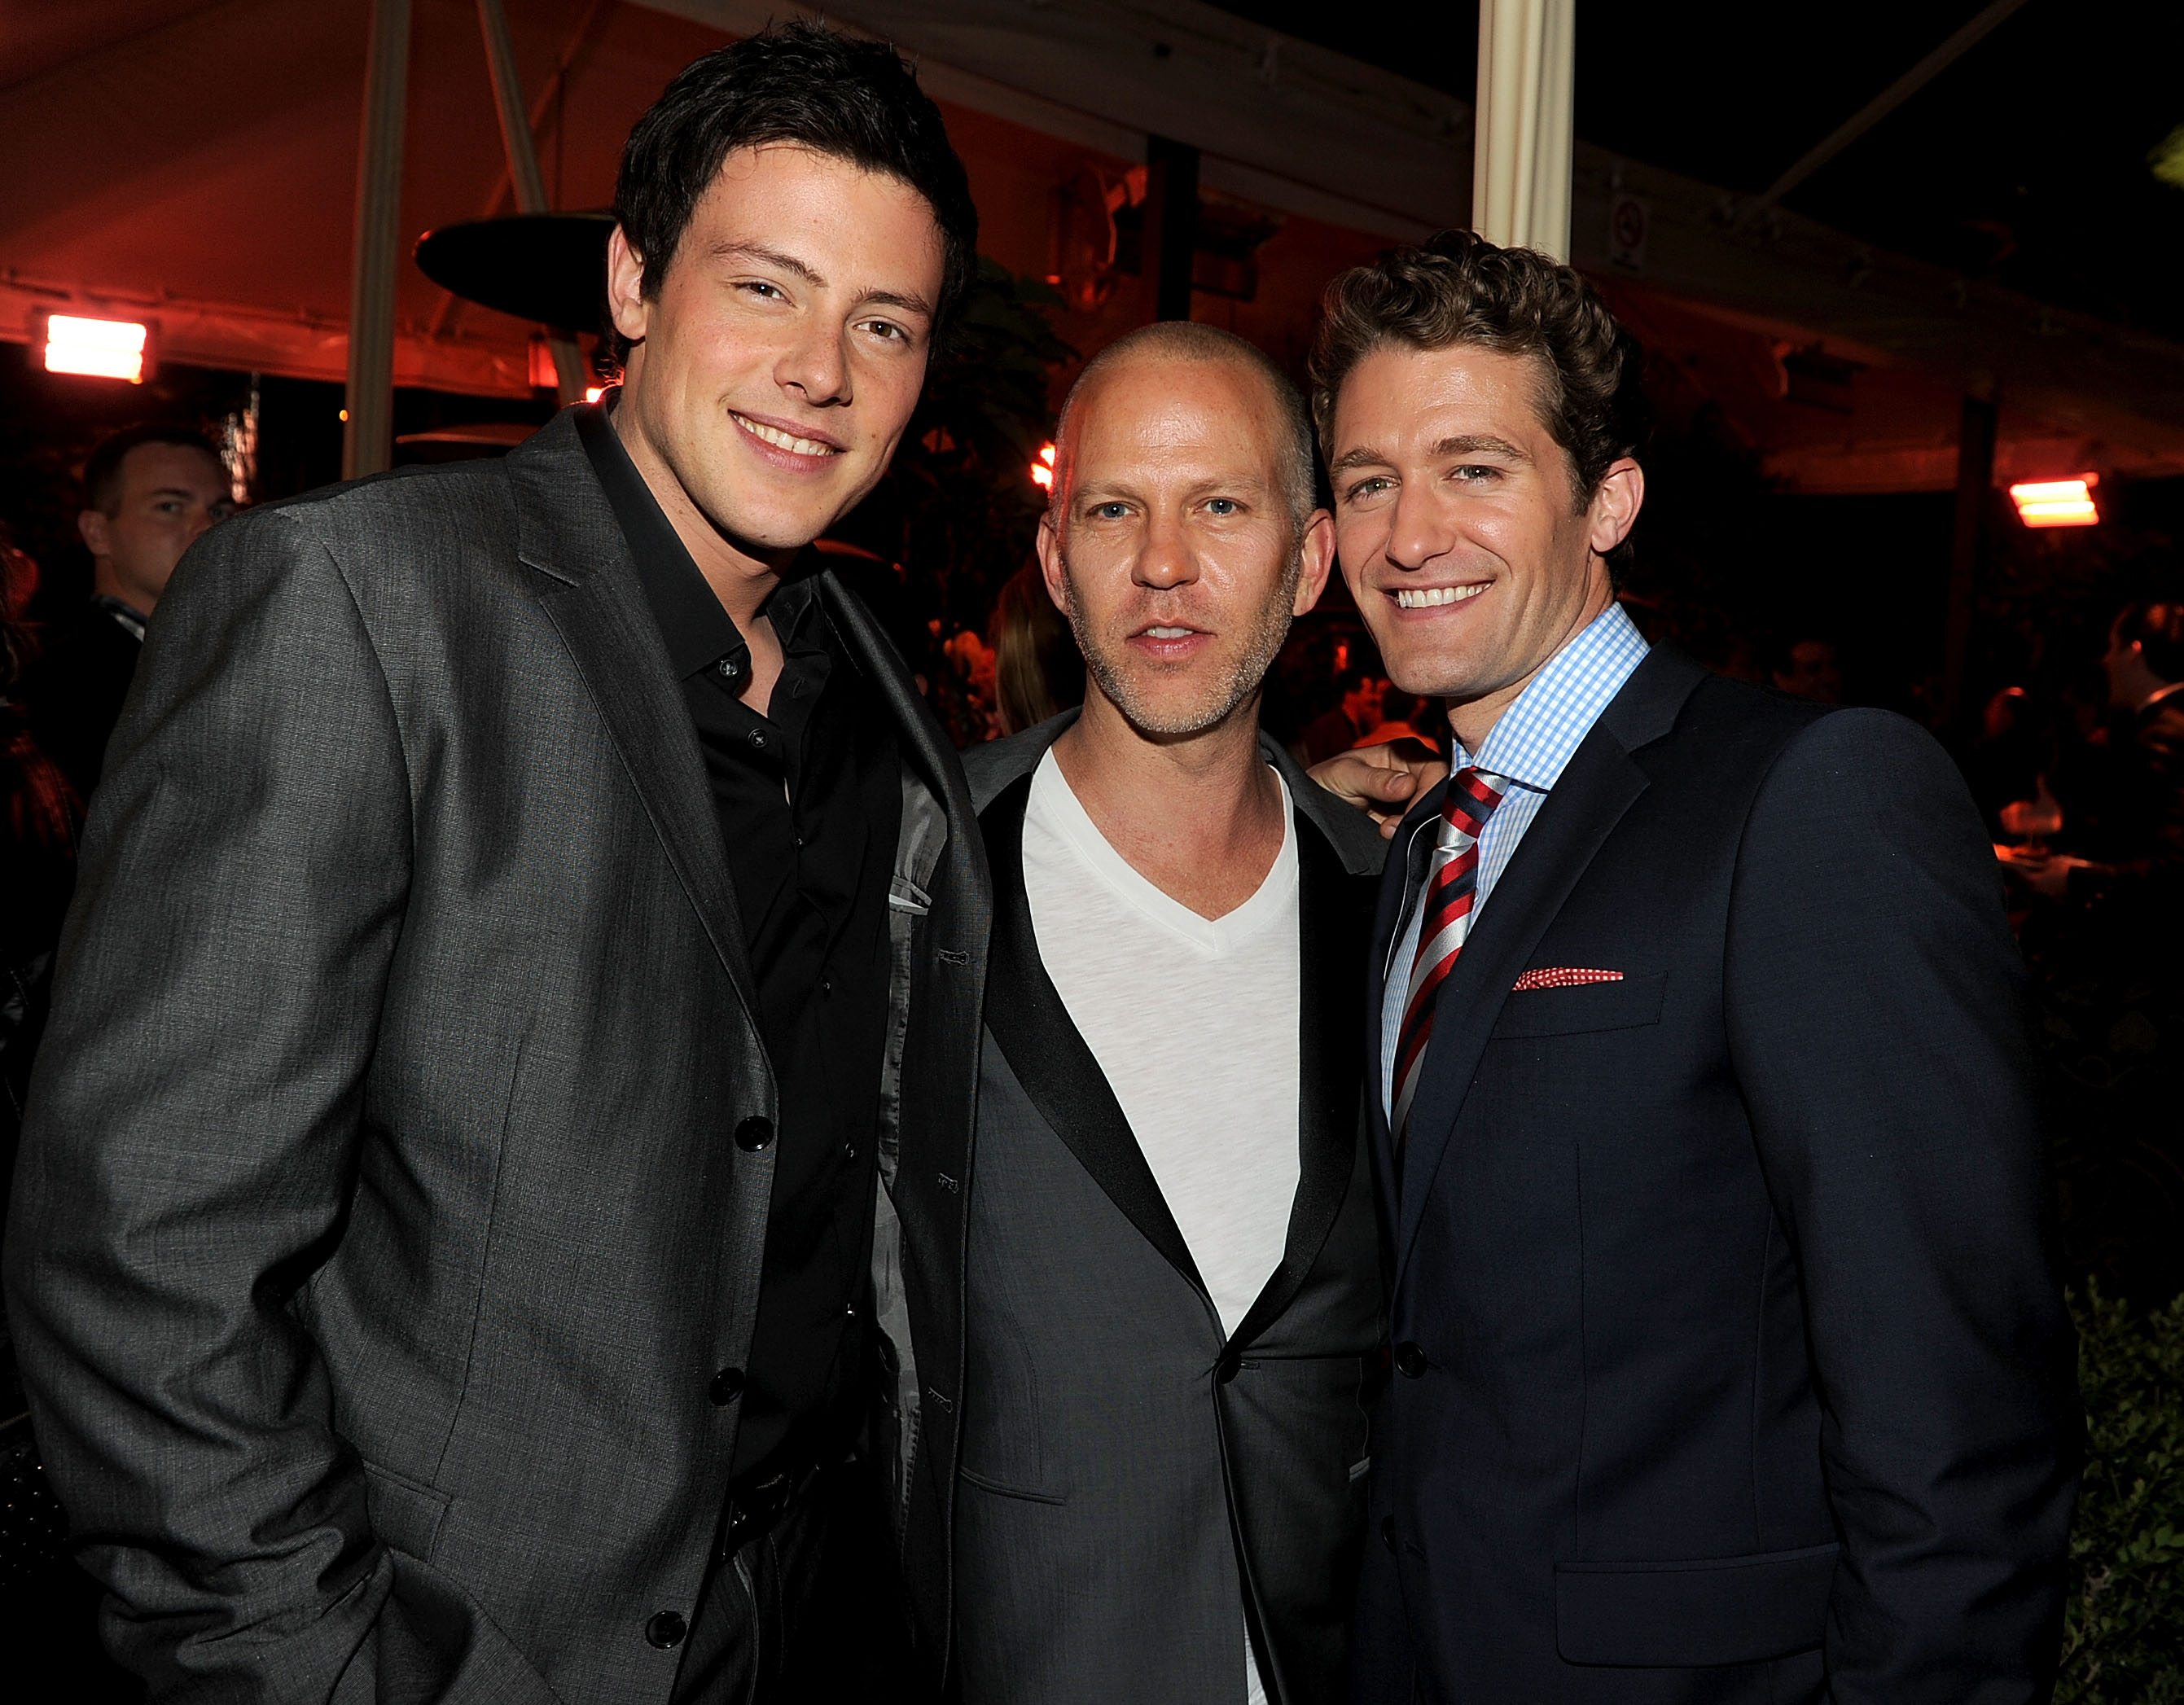 Cory Monteith, Glee co-creator Ryan Murphy and Matthew Morrison attend Fox's "Glee" spring premiere soiree held at Bar Marmont on April 12, 2010 in Los Angeles, California.